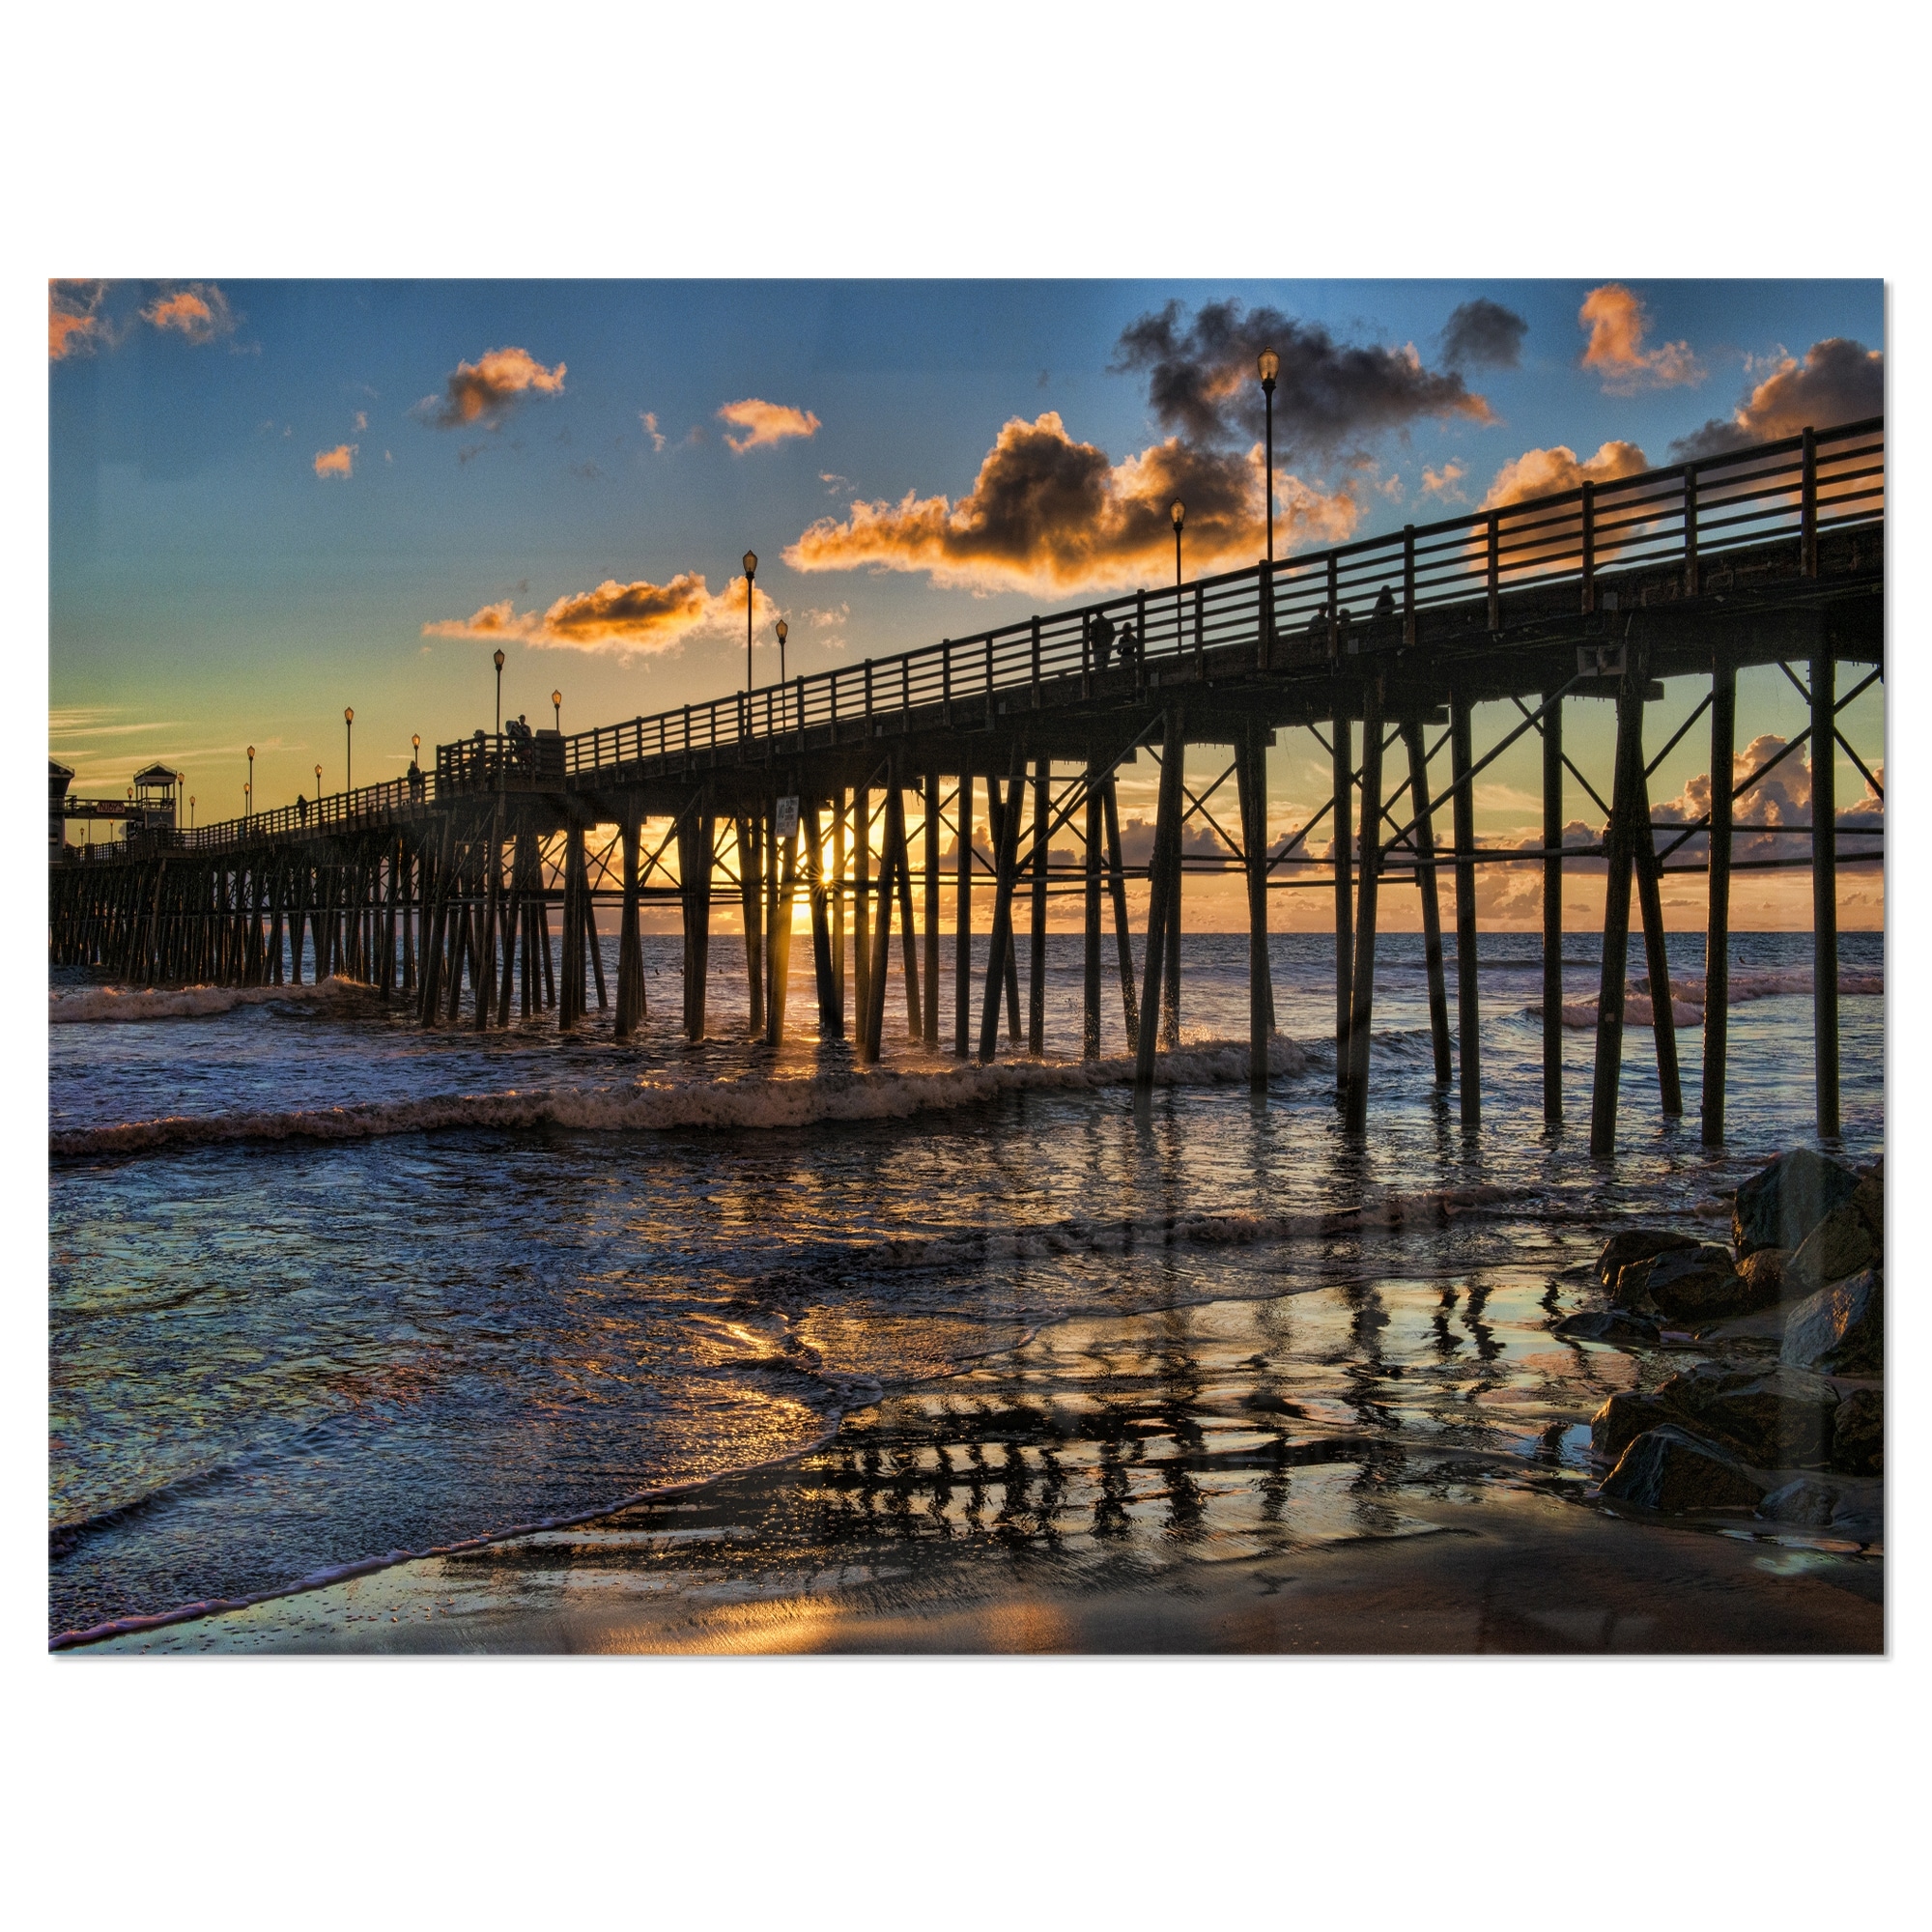 https://ak1.ostkcdn.com/images/products/is/images/direct/84a4170ef48ce92d6aa515b7b4bc4f0034952255/Pacific-Ocean-Sunset-Oceanside-Pier---Modern-Seascape-Glossy-Metal-Wall-Art.jpg